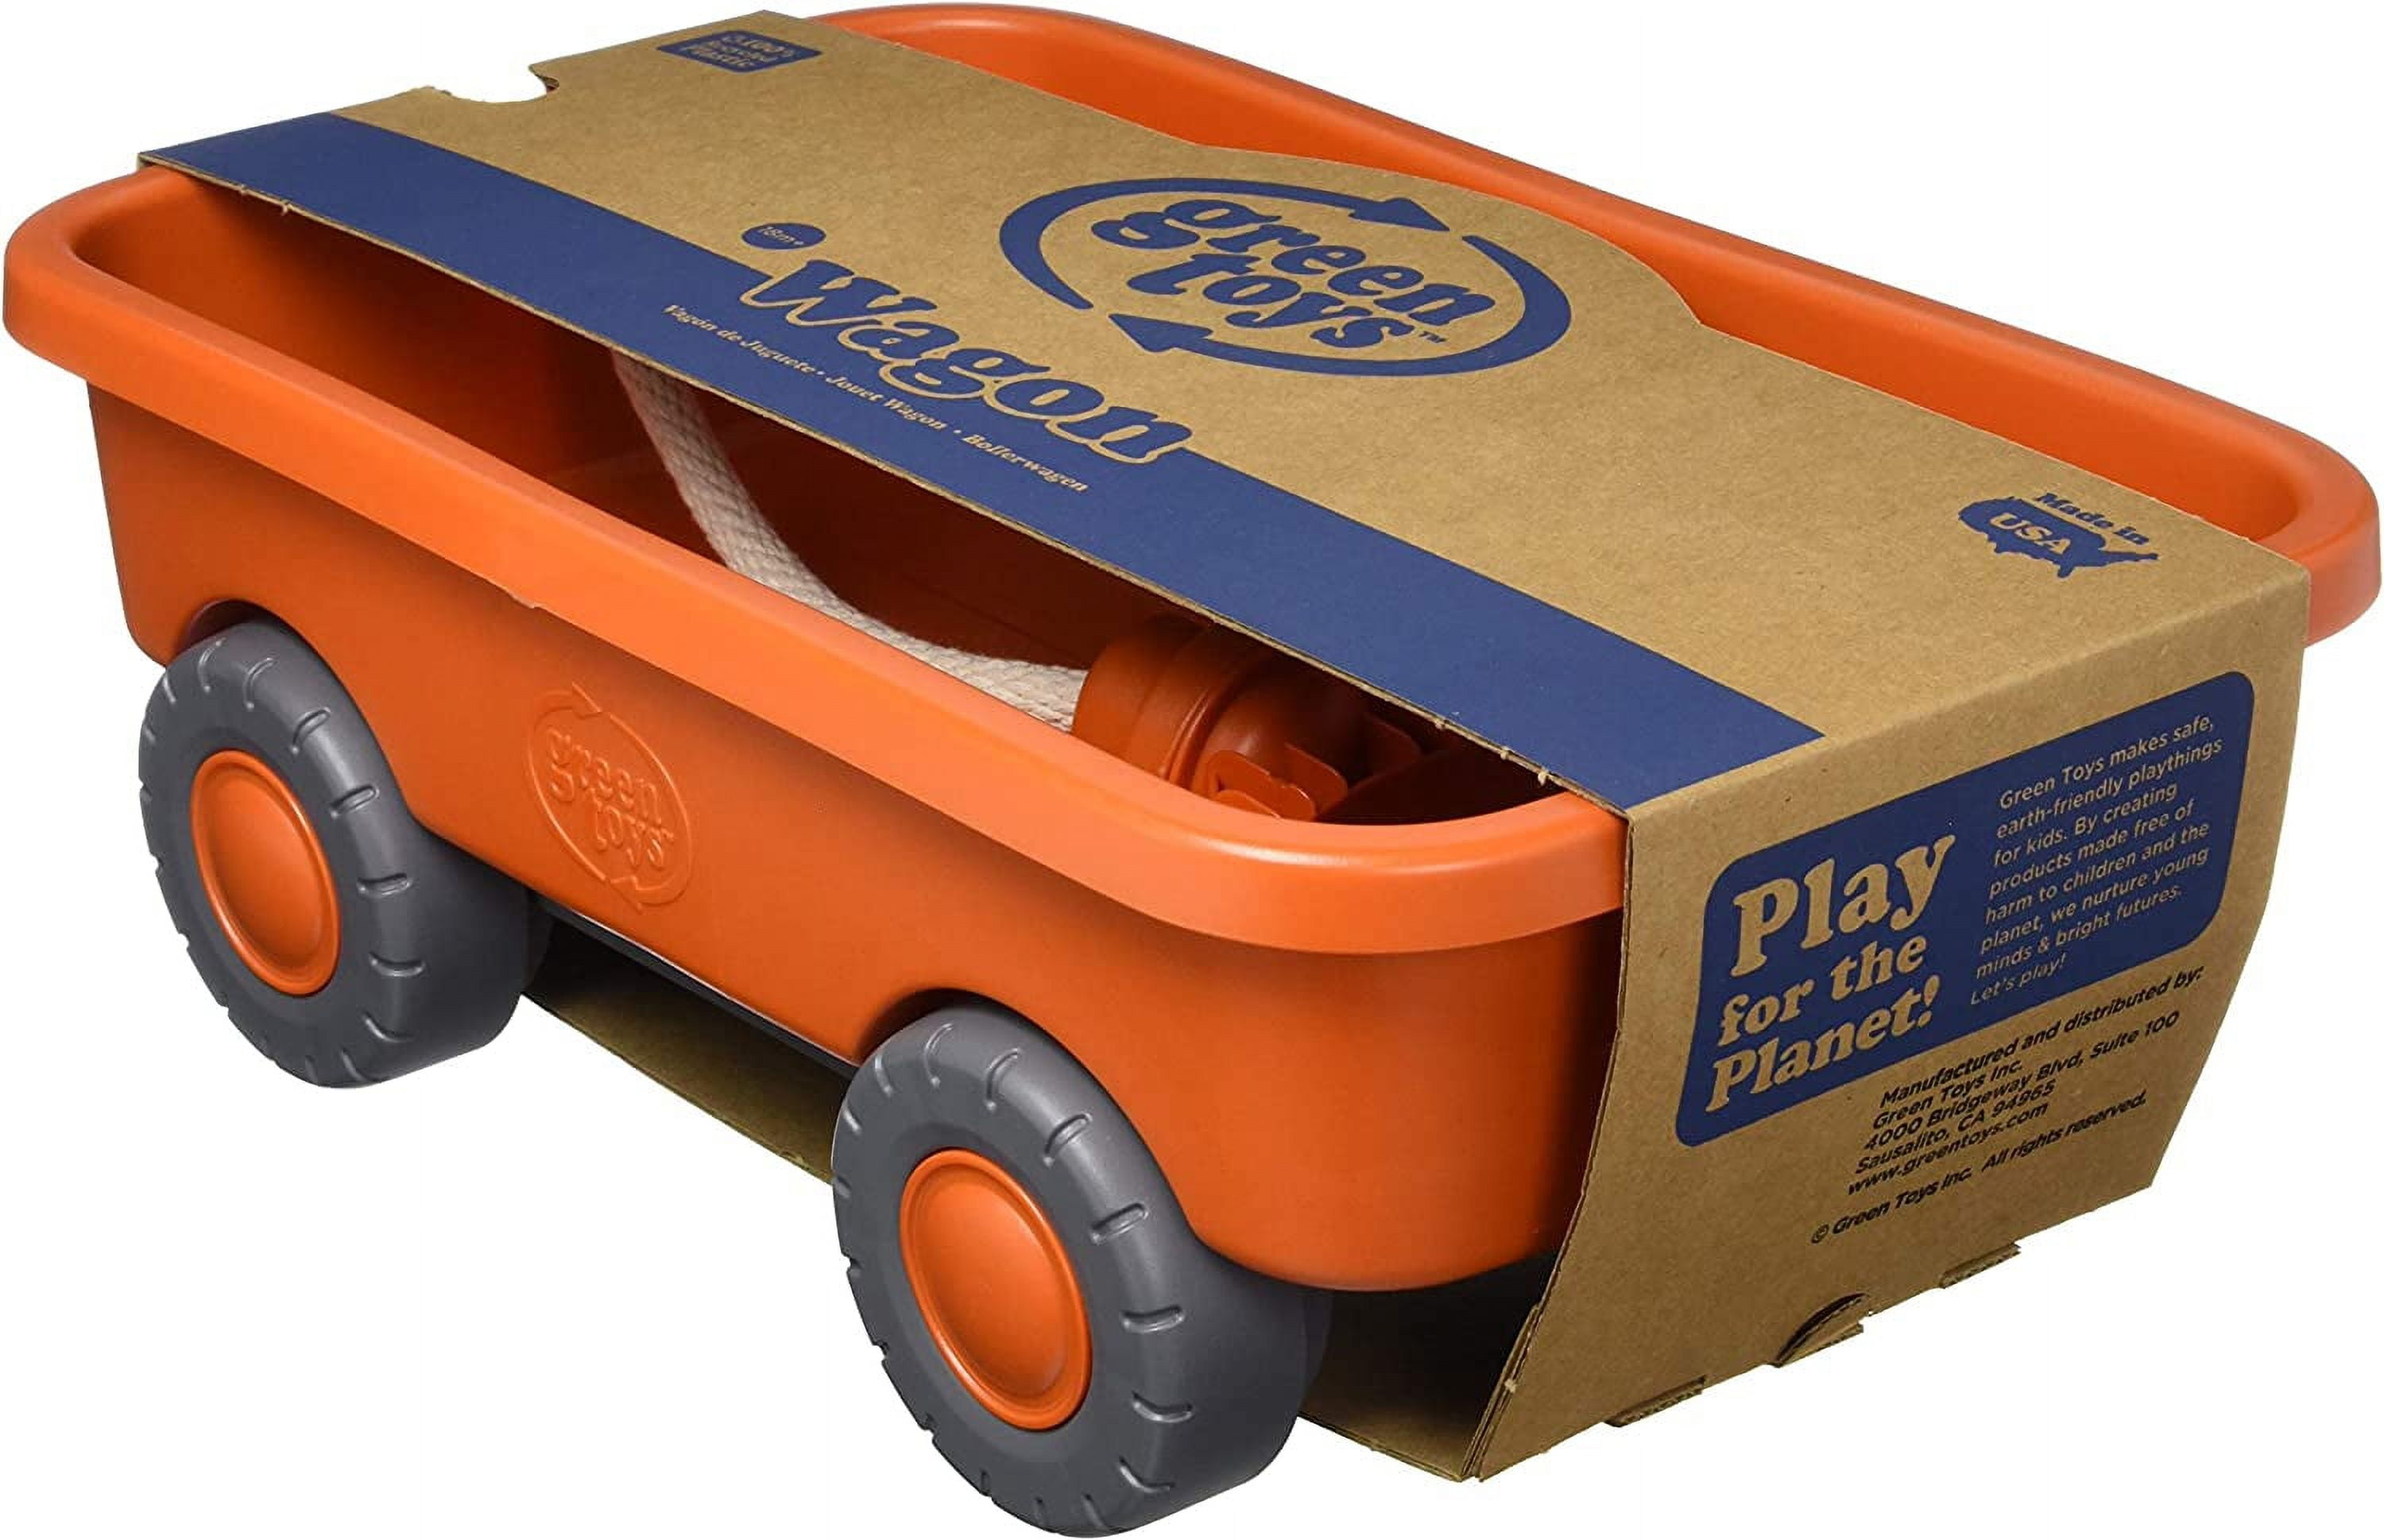 USA. Motor phthalates, Plastic, Toy CB Wagon, in Recycled - Toys Vehicle. Safe, Orange BPA, Green PVC. Made No Pretend Kids Skills, Dishwasher Play, Outdoor